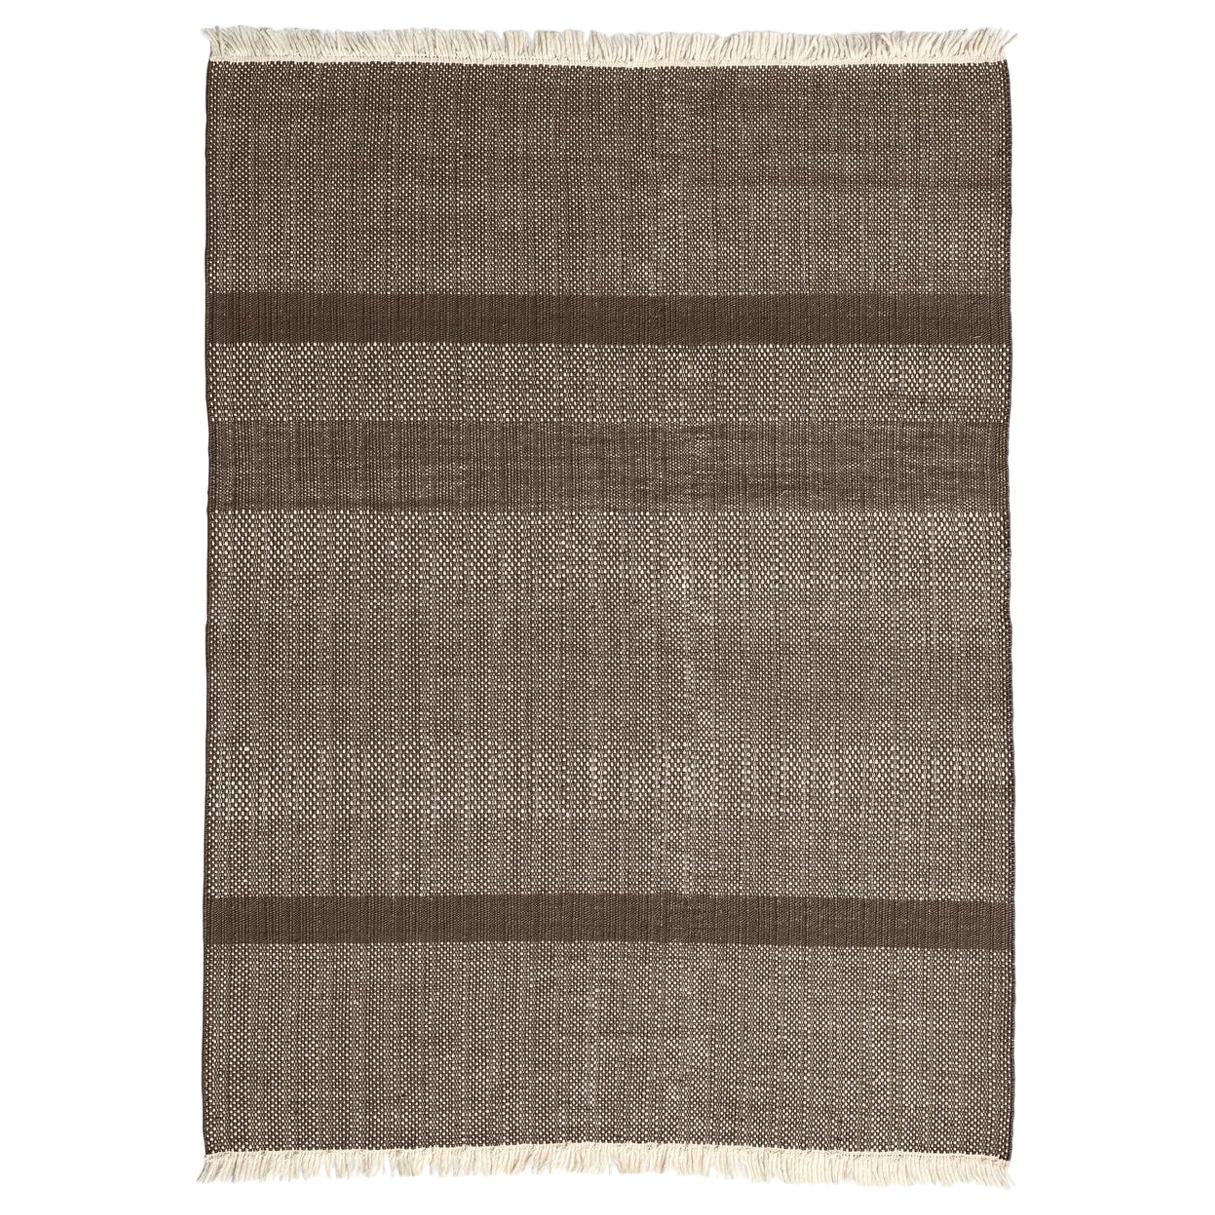 Tres Chocolate Hand-Loomed Wool and Felt Texture Rug by Nani Marquina